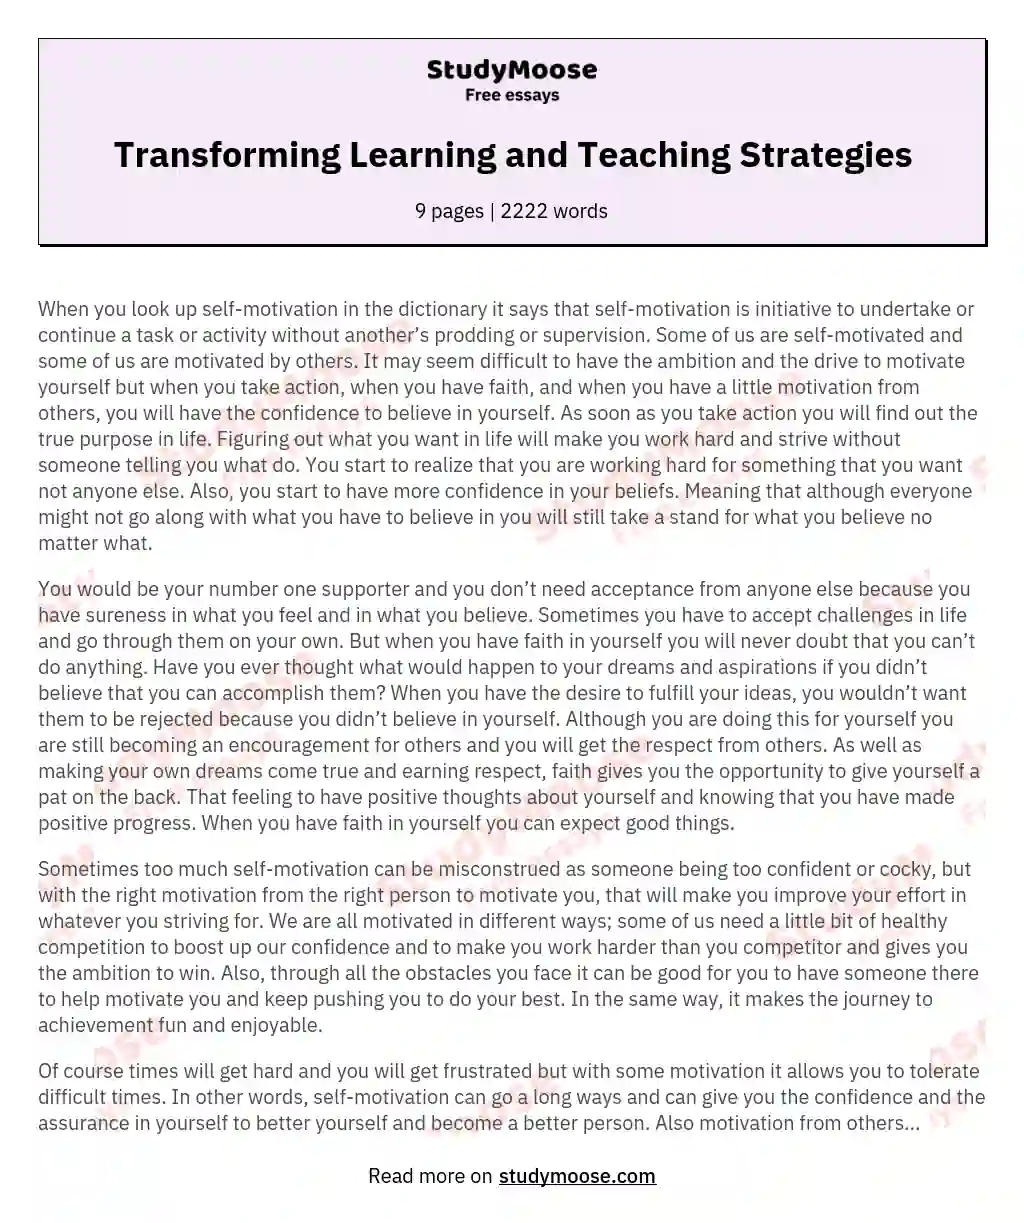 Transforming Learning and Teaching Strategies essay